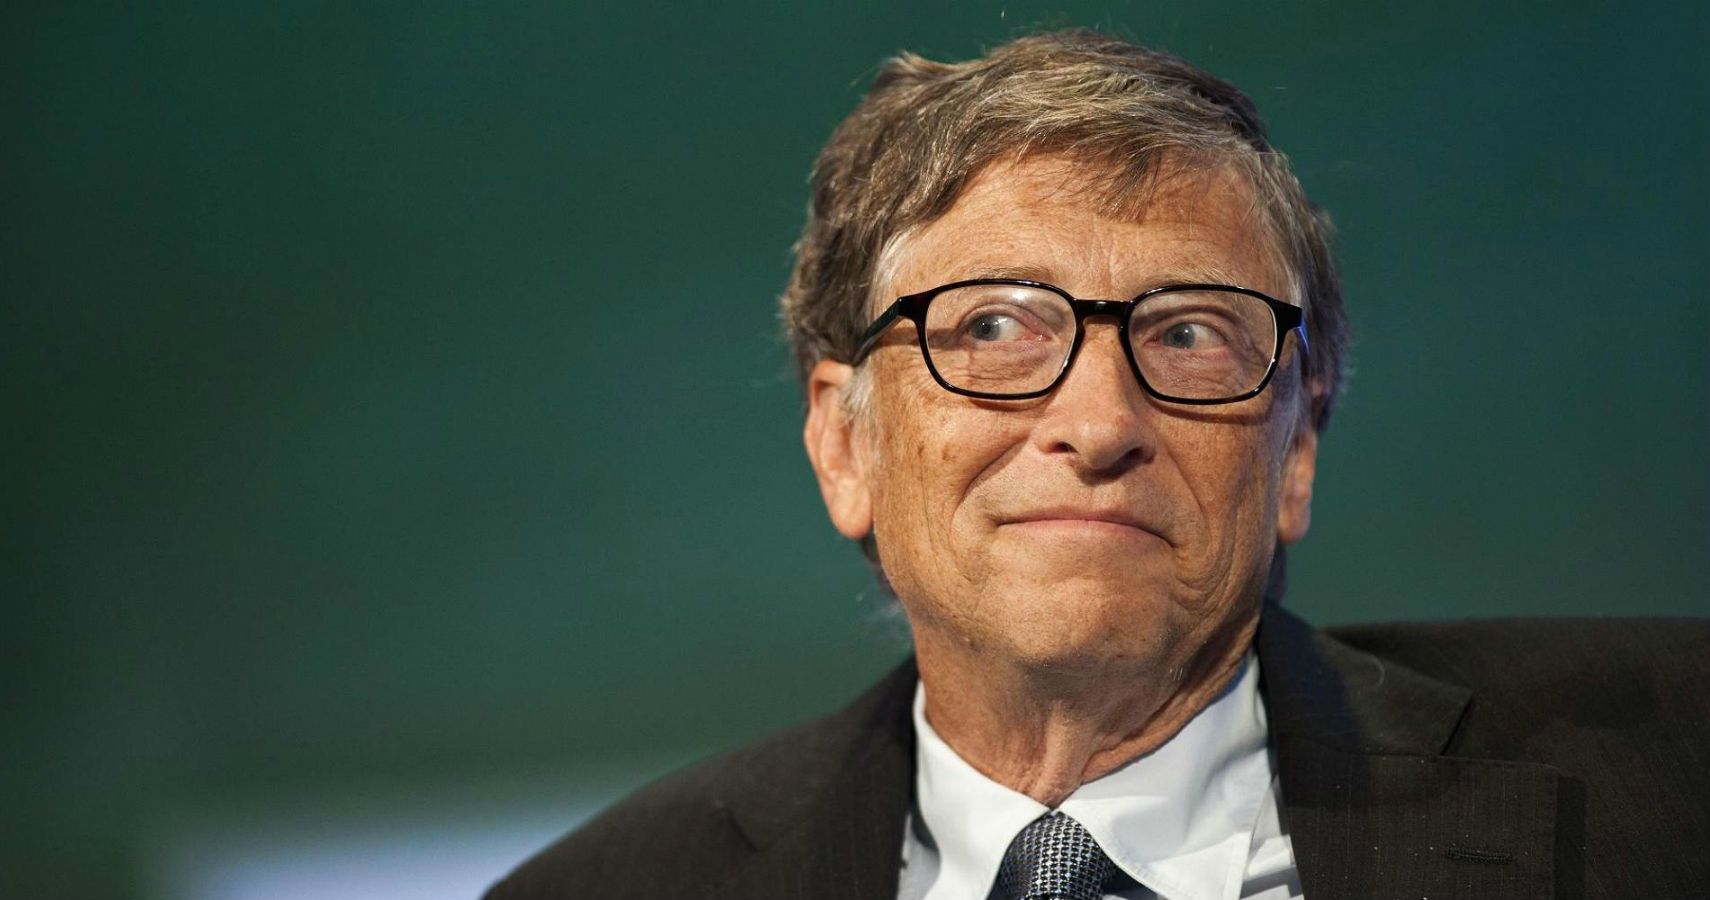 Opiate tom strække Watch Bill Gates Try To Guess The Price Of Every Day Items